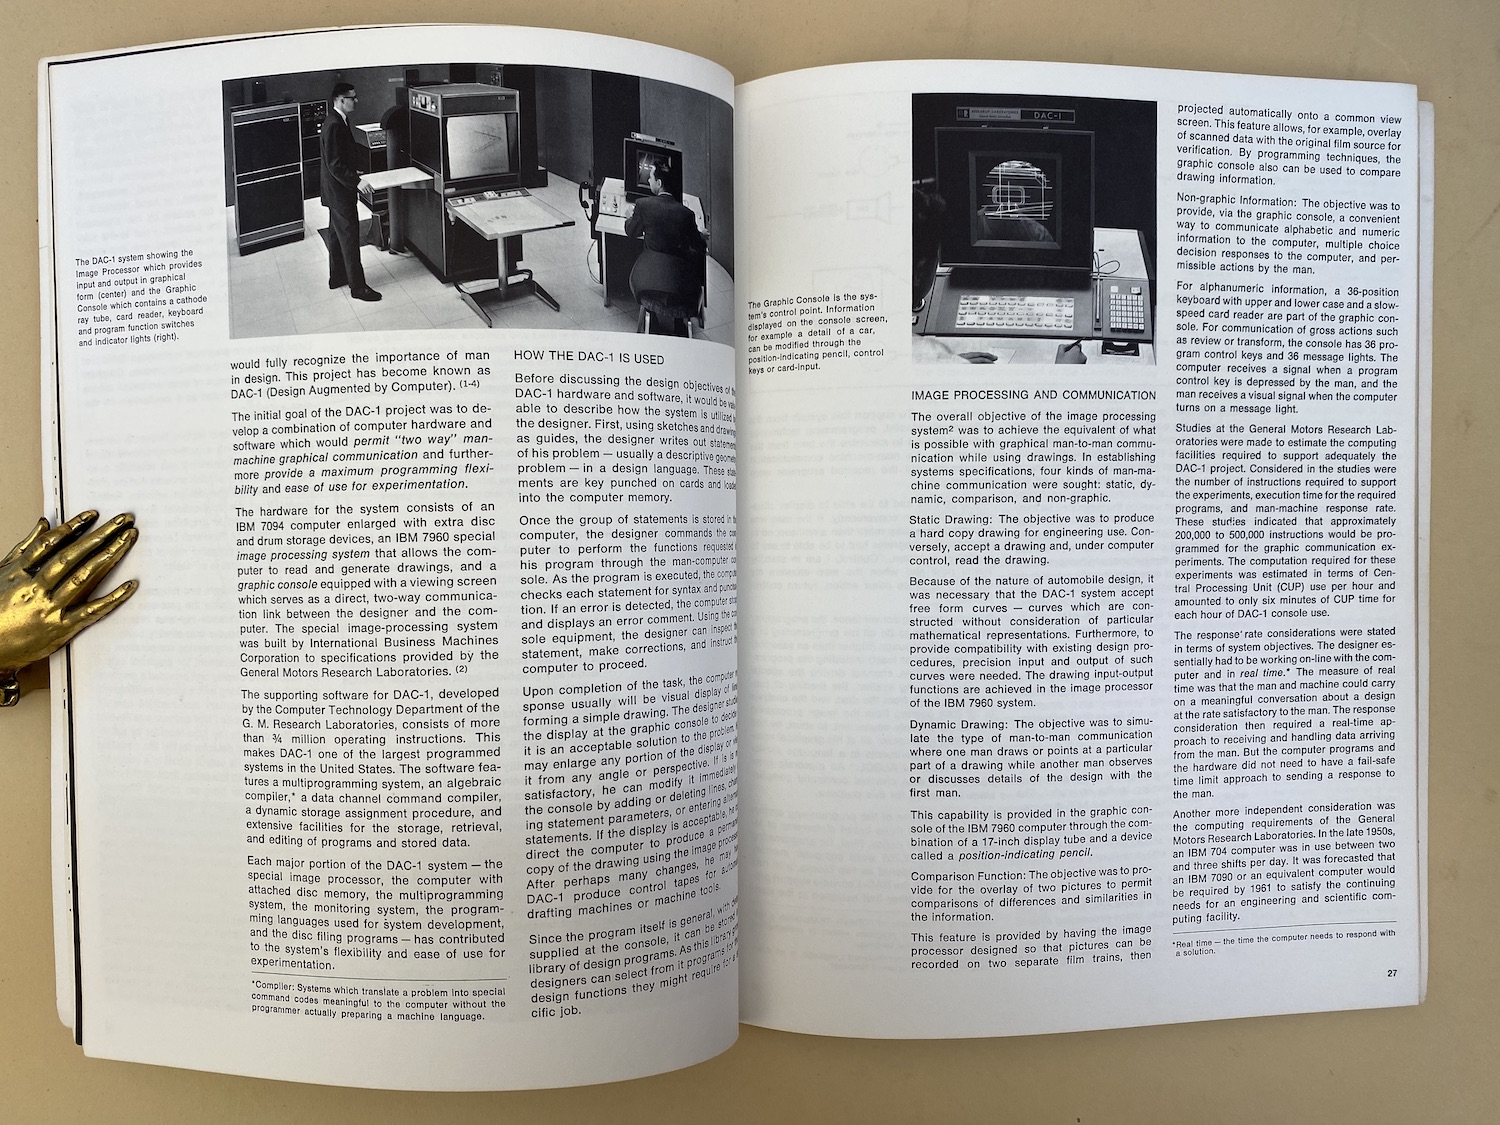 Article by Edwin Jacks on the General Motors DAC-1 system.